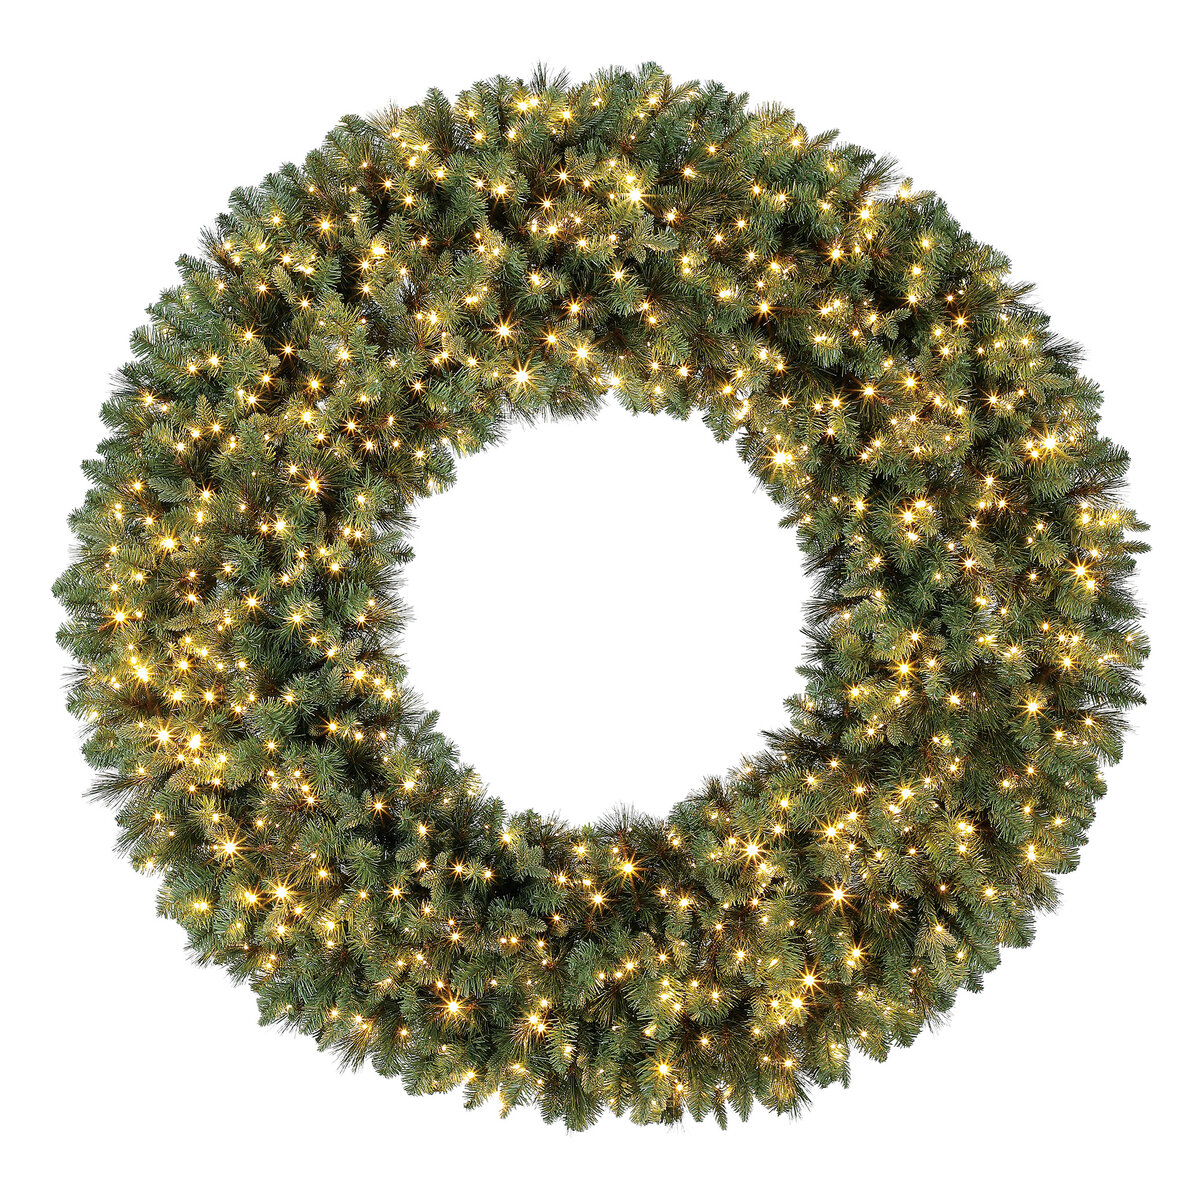 5ft (1.5 m) Christmas Wreath With 800 Micro LED Lights